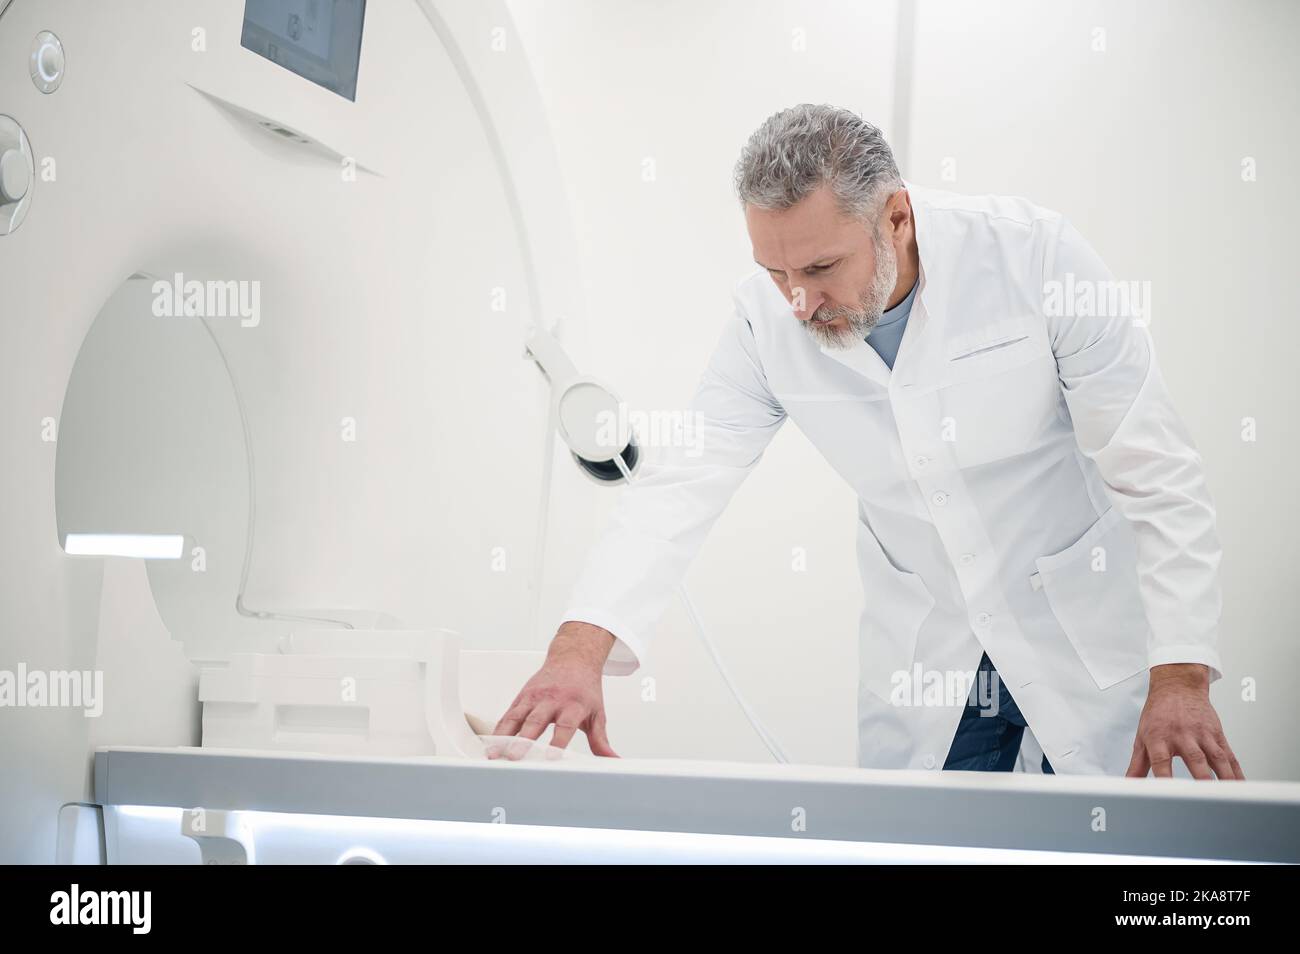 Male gray-haired doctor in a lab coat preparing MRI scanner Stock Photo